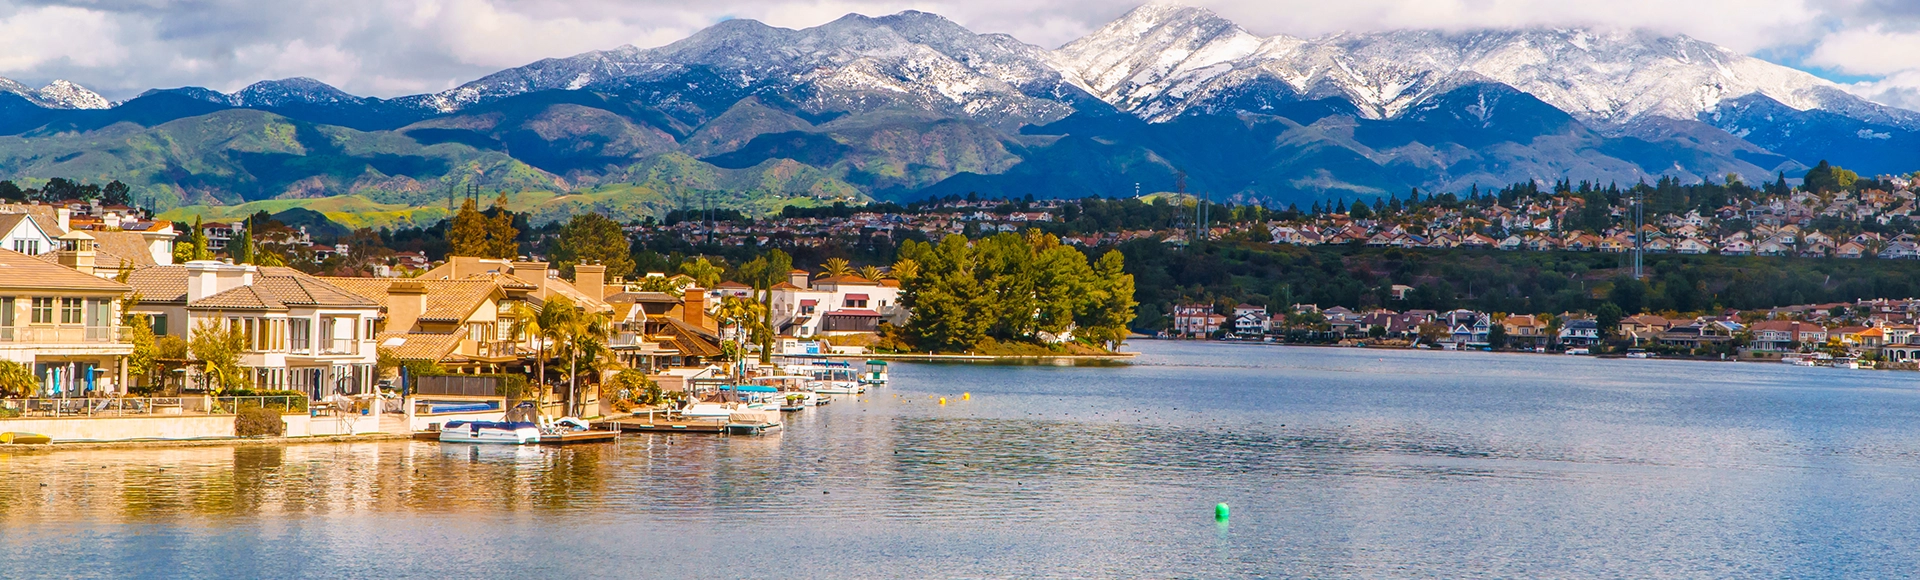 Scenic Lake Mission Viejo with snow capped Santa Ana Mountains in the distance, after epic snowstorm in Southern California